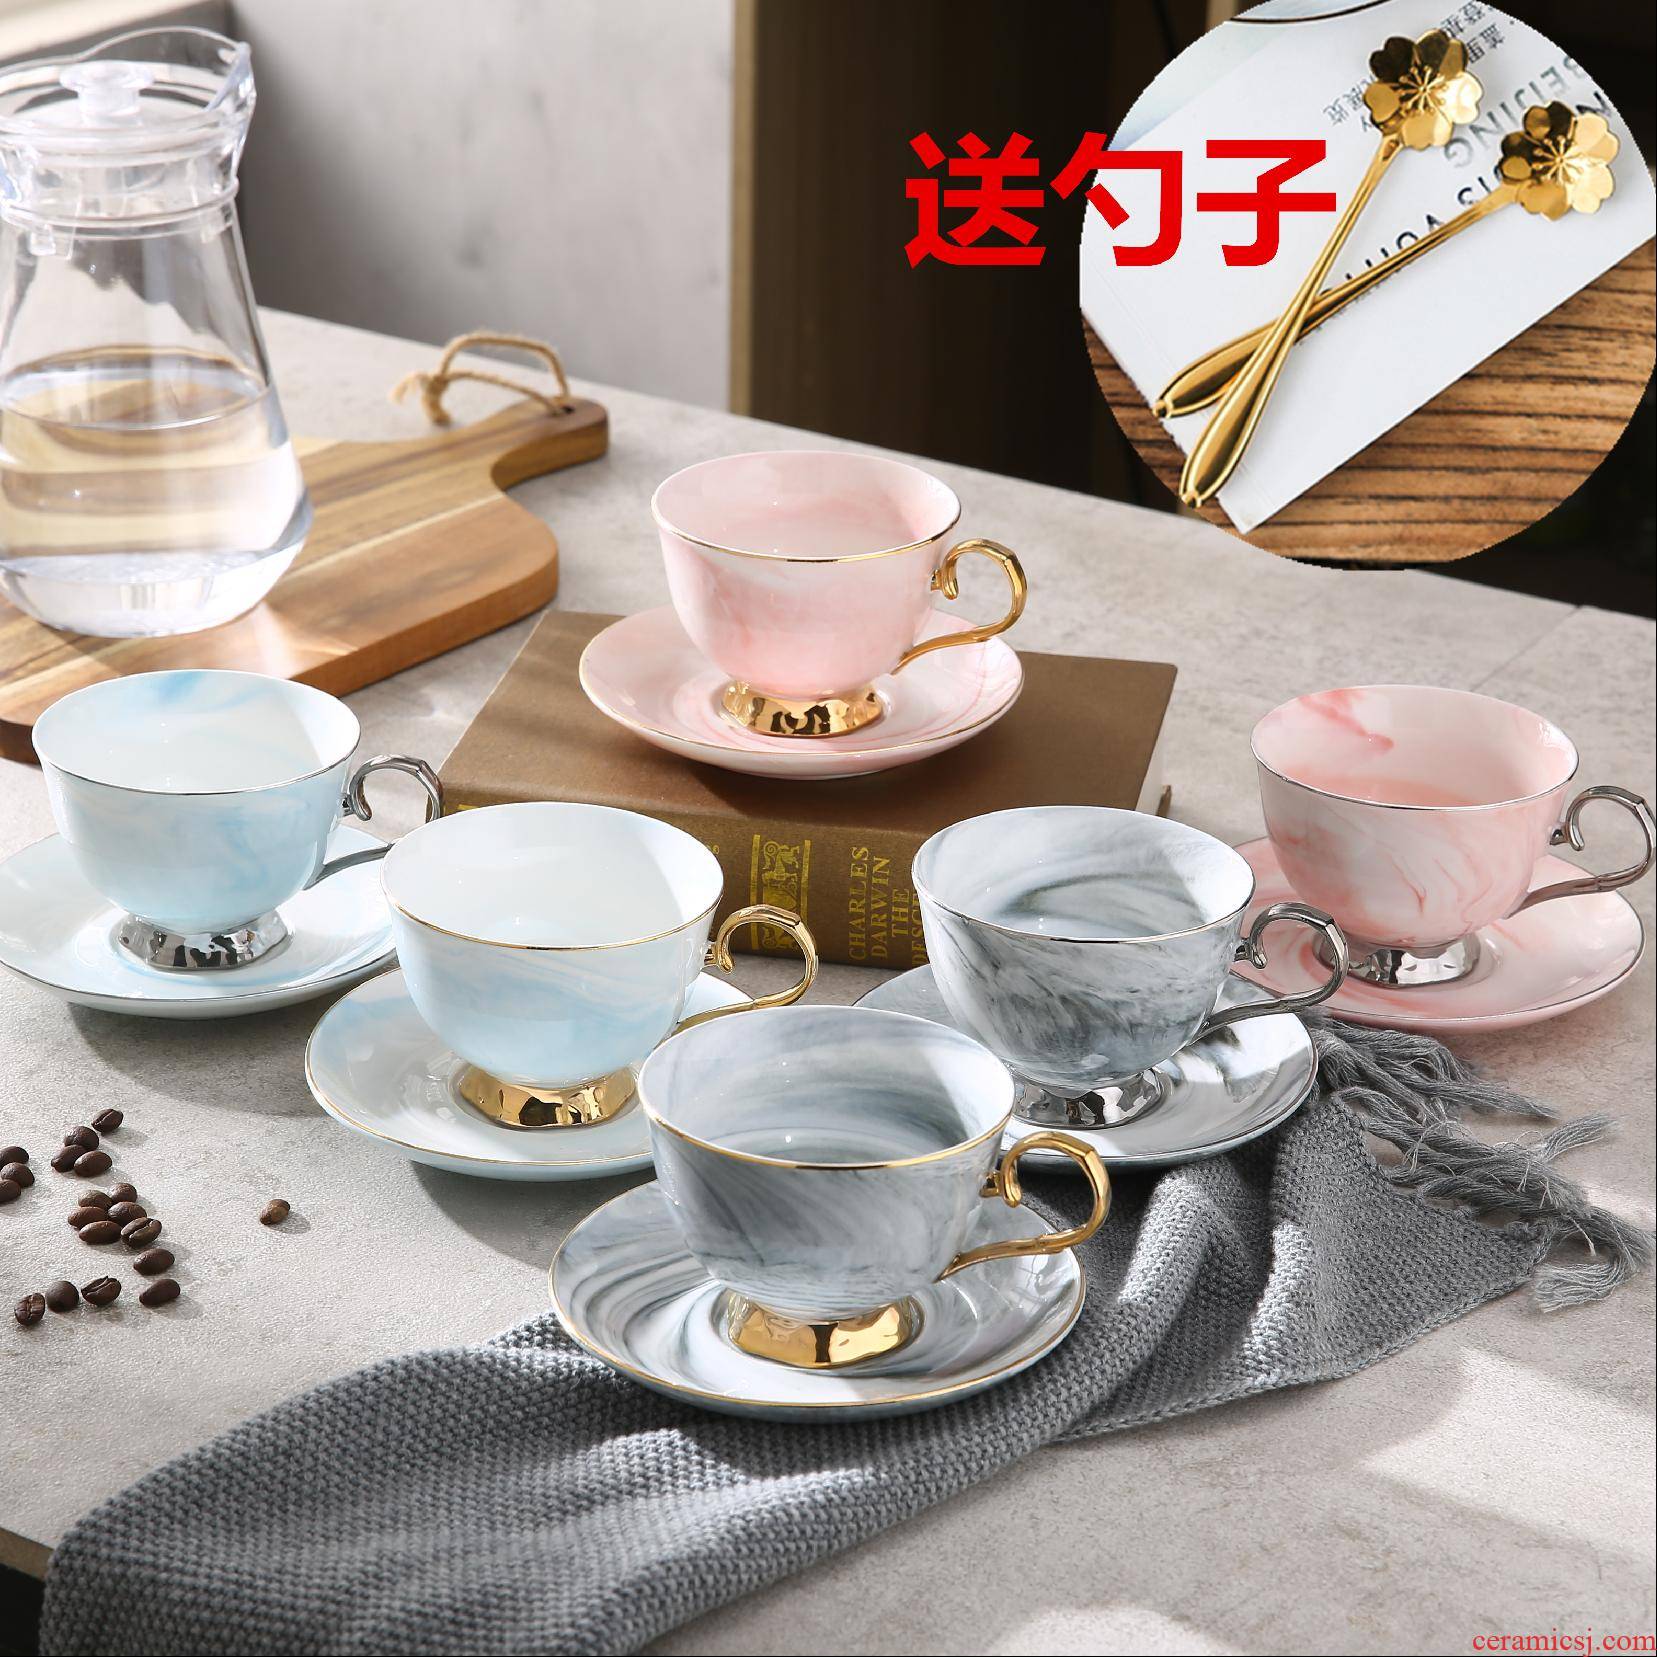 North European contracted creative marble ceramic coffee cups and saucers English afternoon tea red cup dish gift set